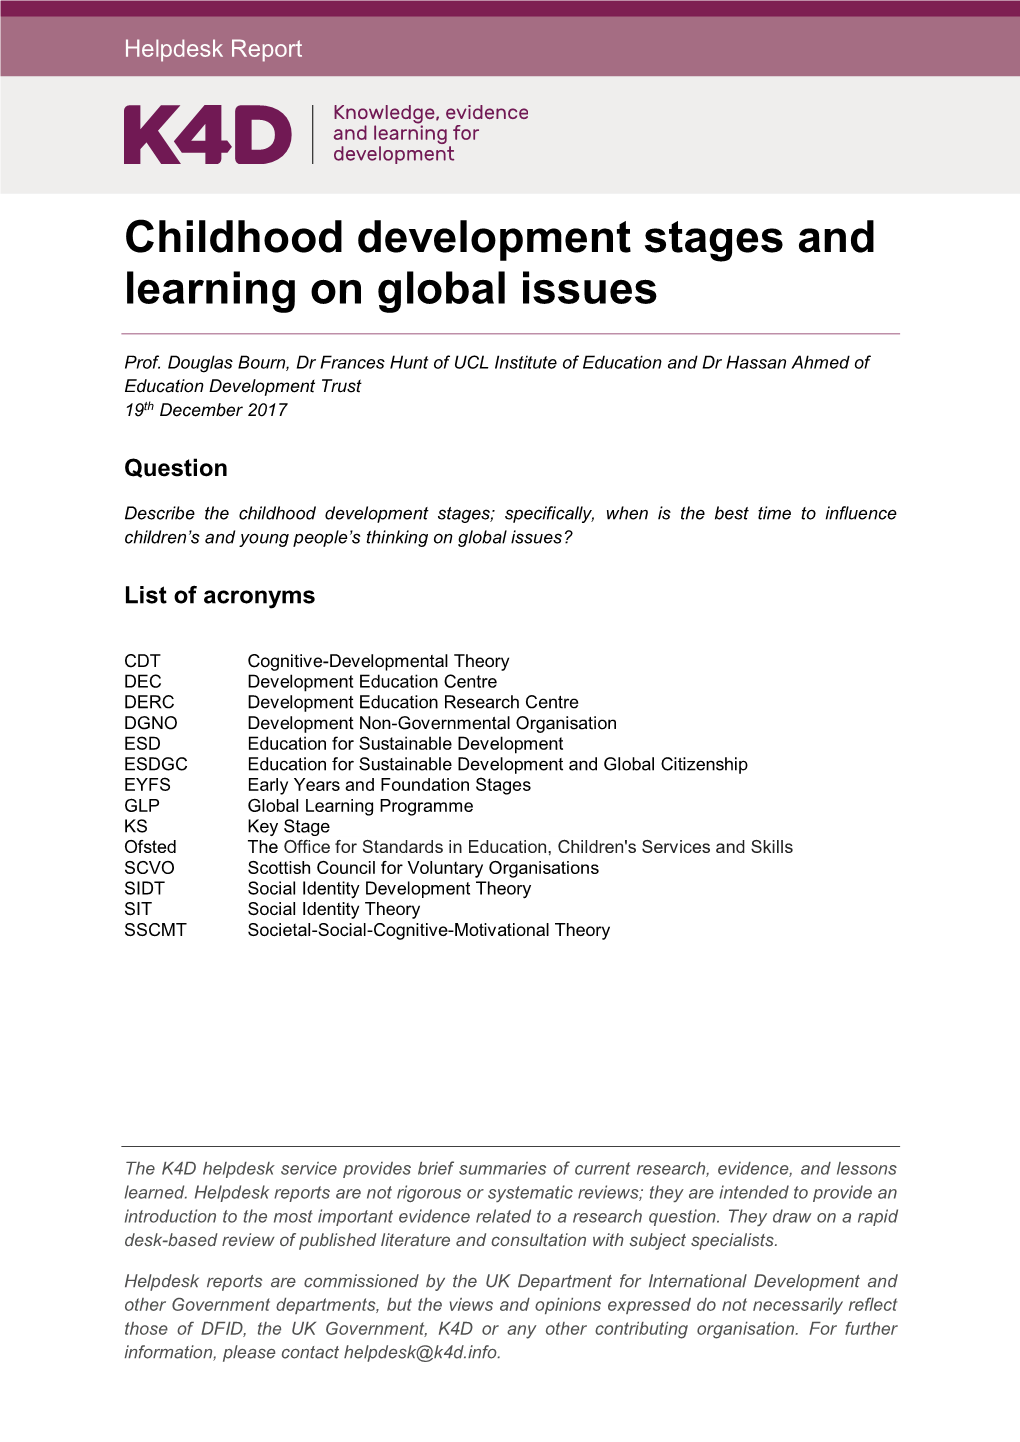 Childhood Development Stages and Learning on Global Issues